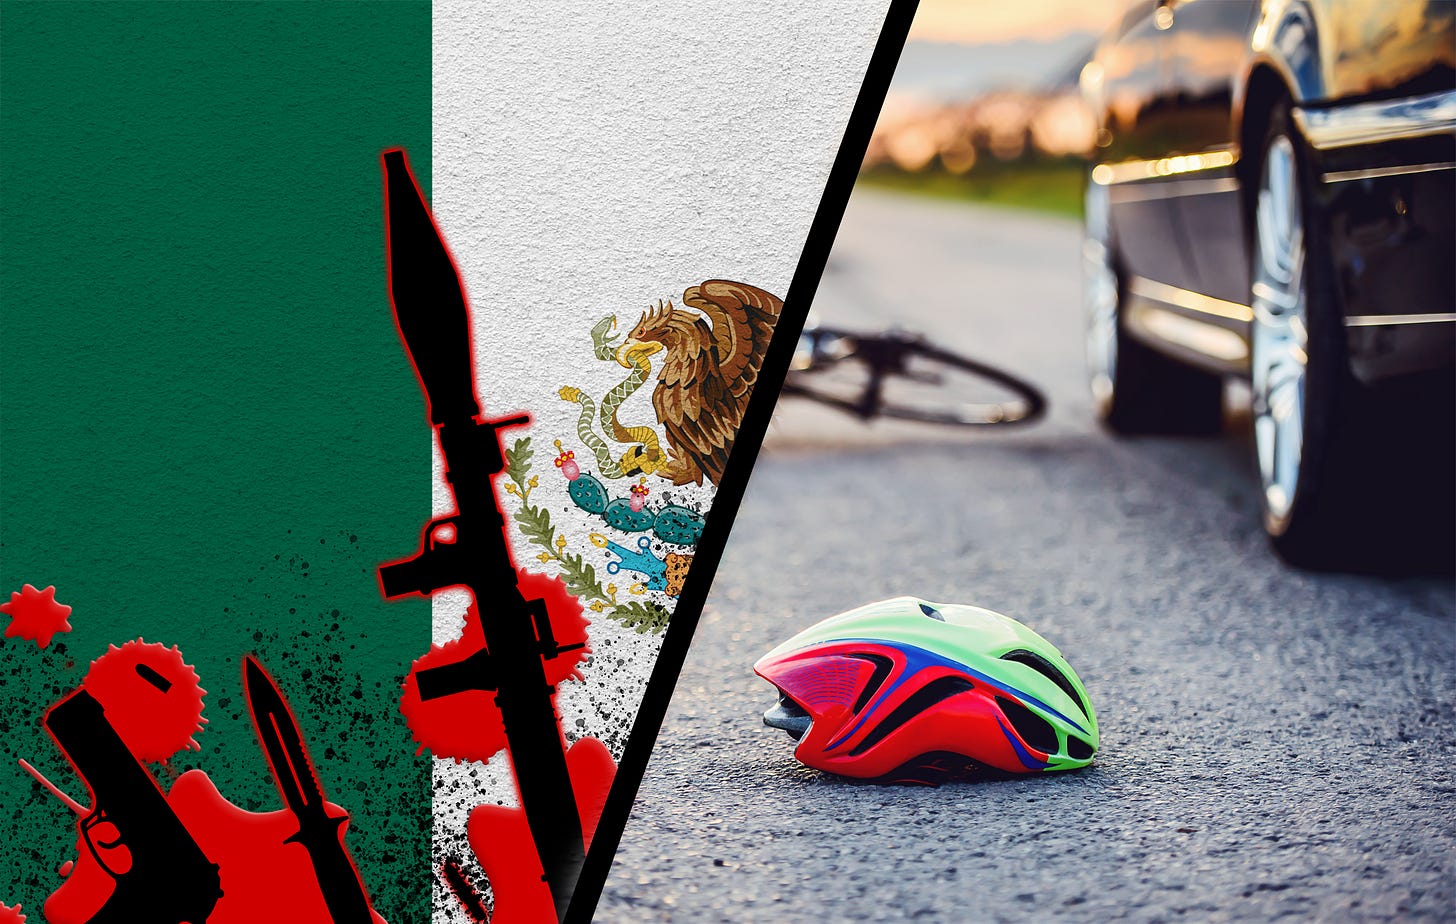 Graphic showing weapons superimposed on the Mexican flag and a bicycle accident involving an automobile